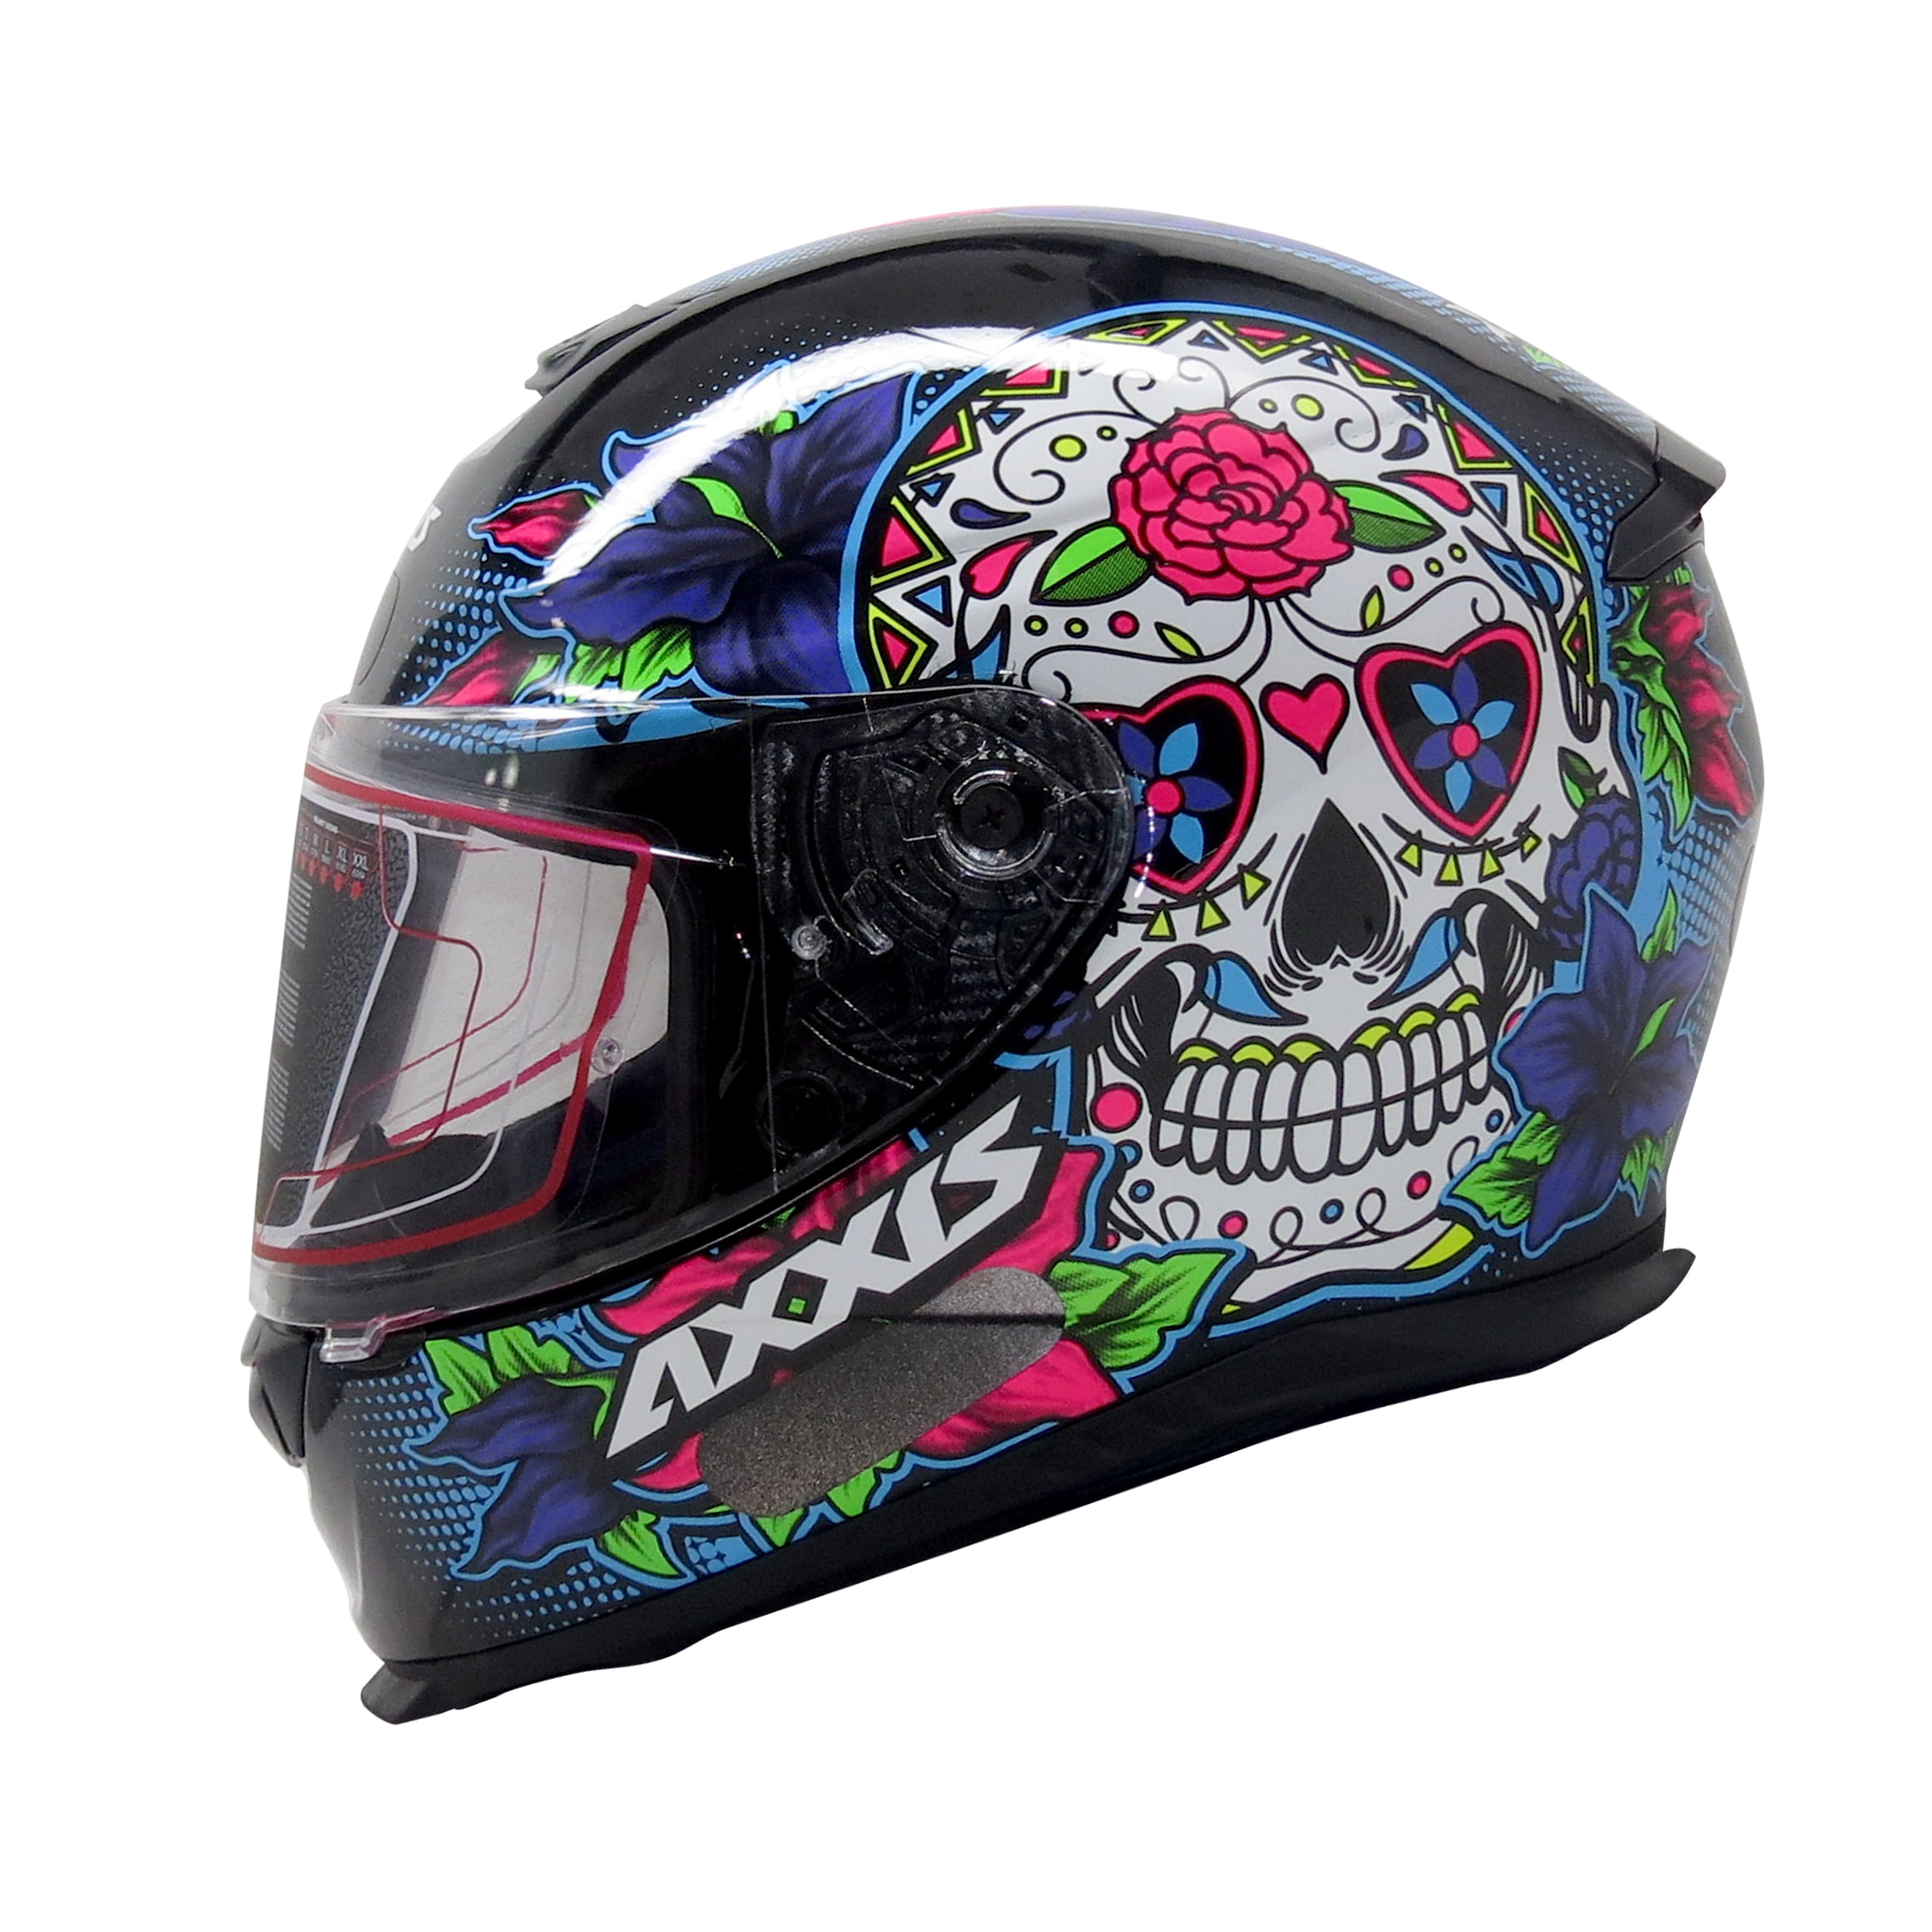 Capacete Axxis Skull Gloss Black Blue